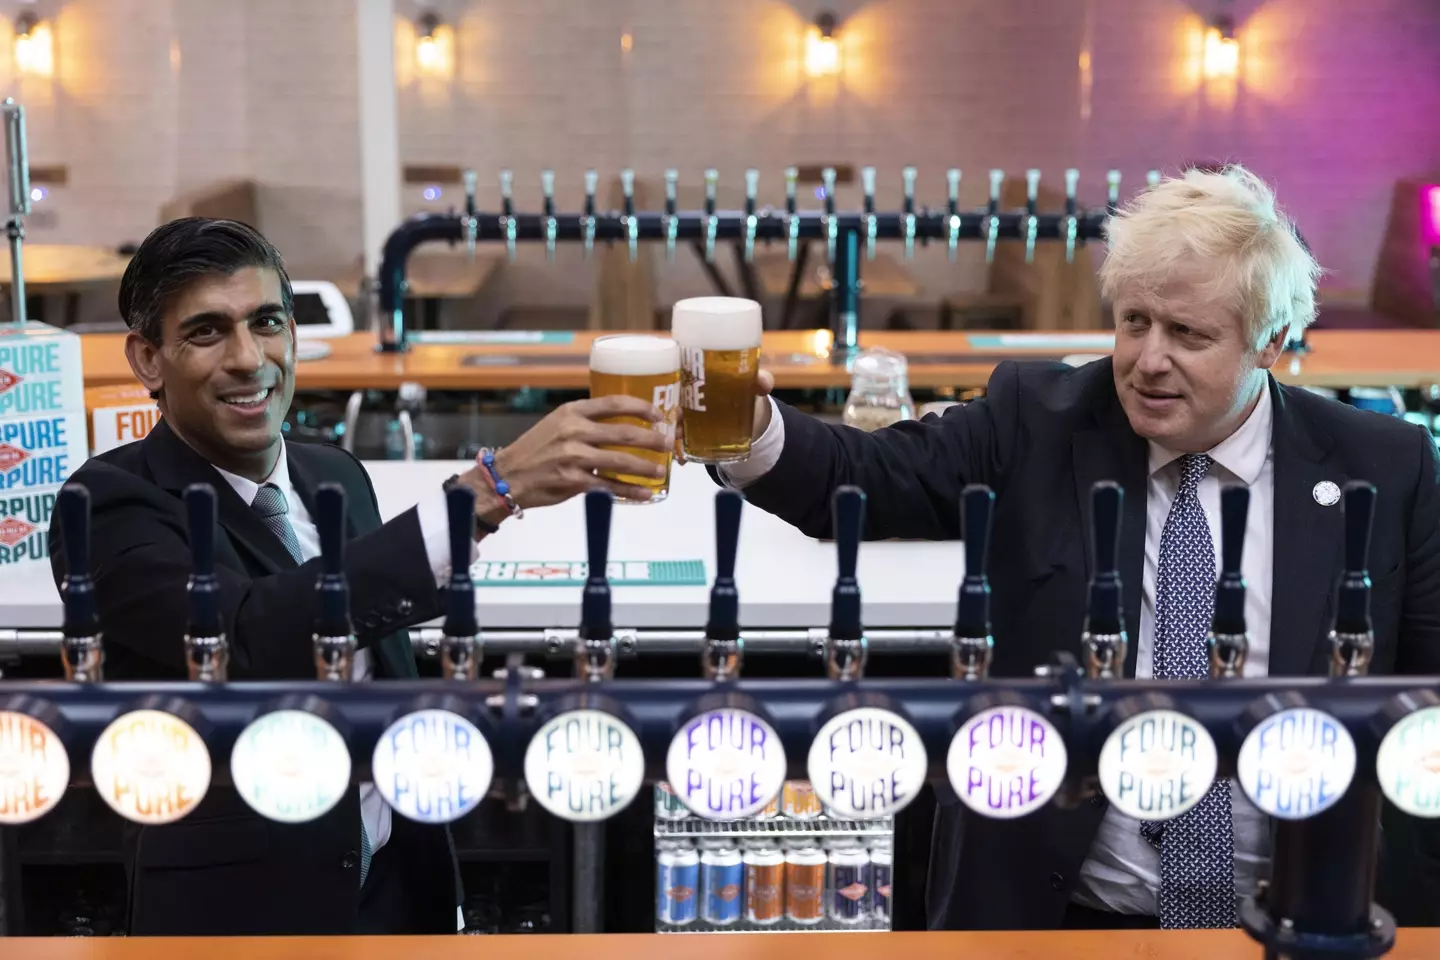 File photo of Prime Minister Boris Johnson with Rishi Sunak during a visit to Fourpure Brewery.